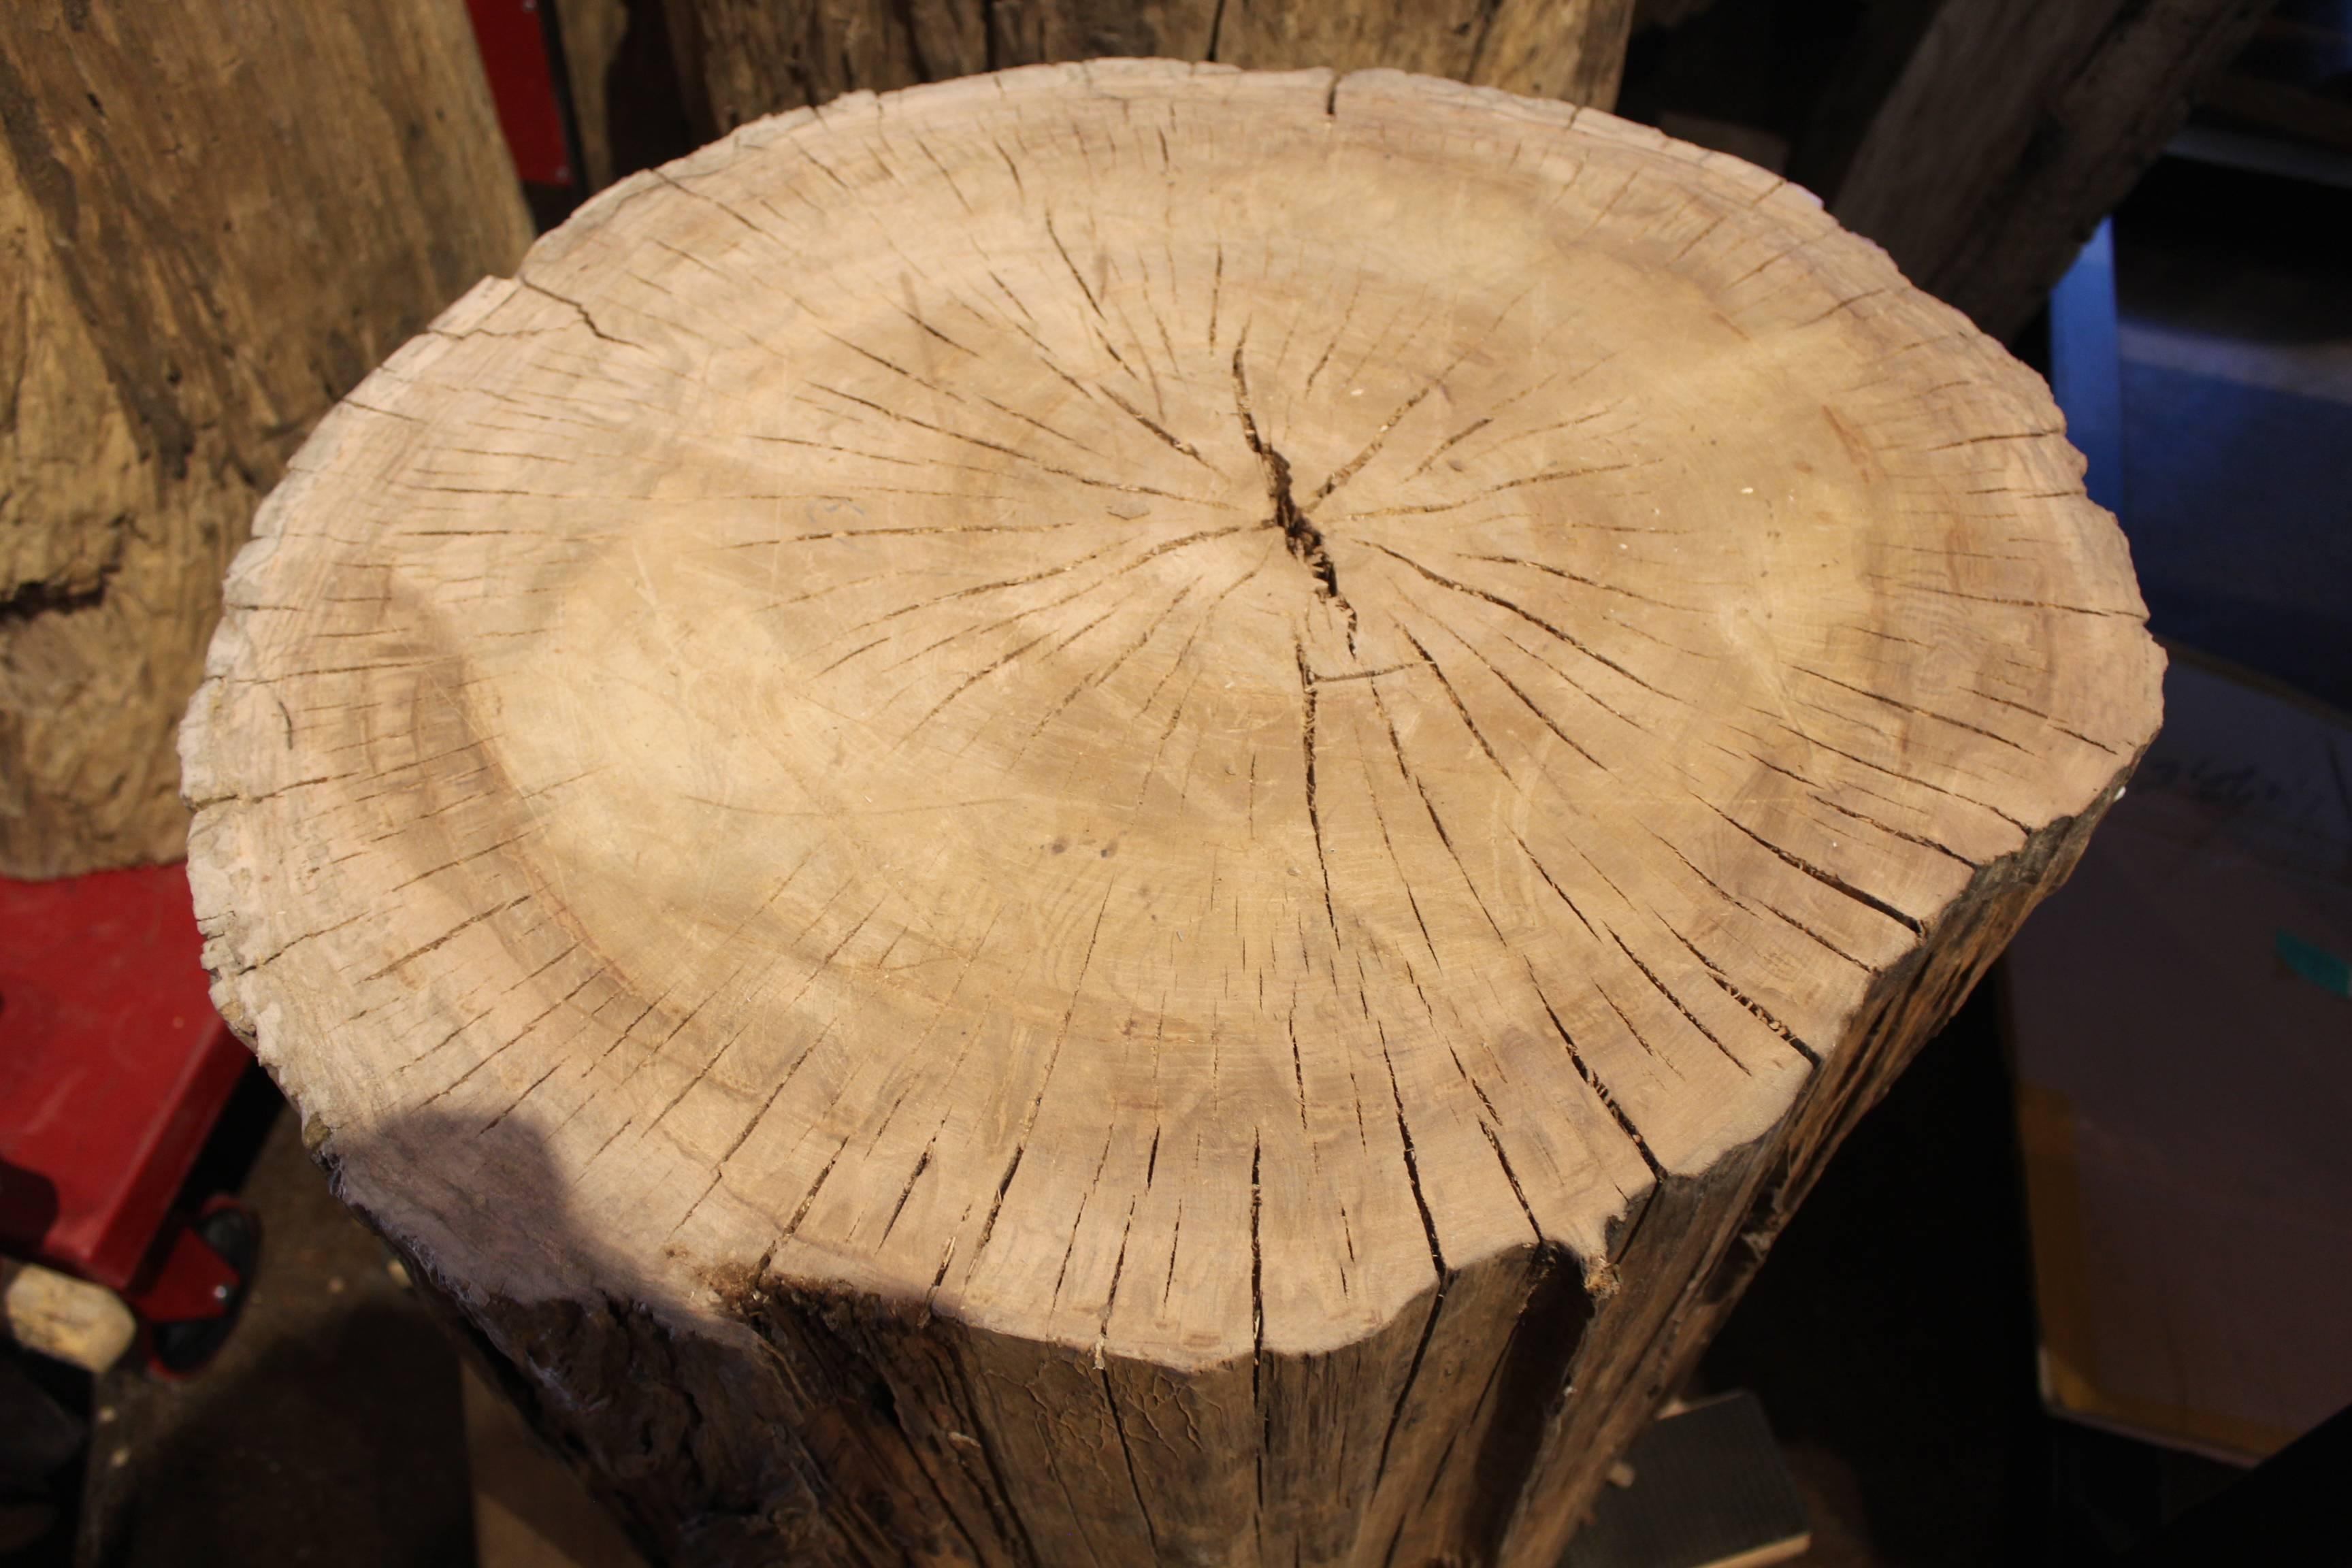 Organic Modern Oak Section as End Table from the Bass Farm in North Carolina